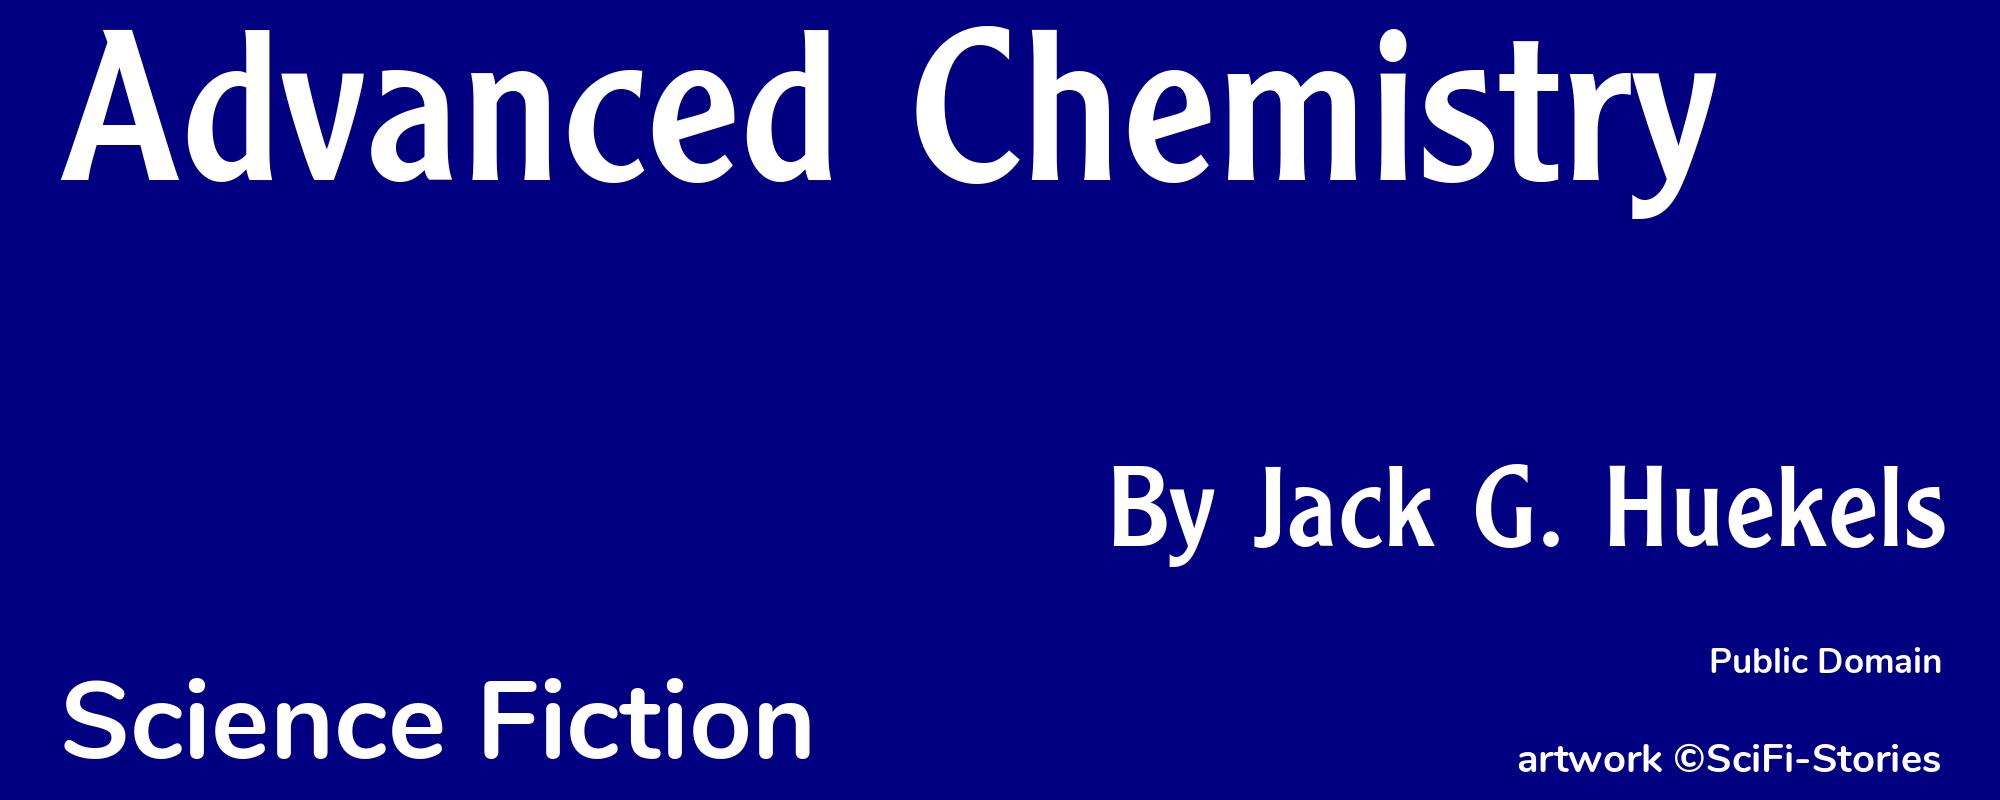 Advanced Chemistry - Cover